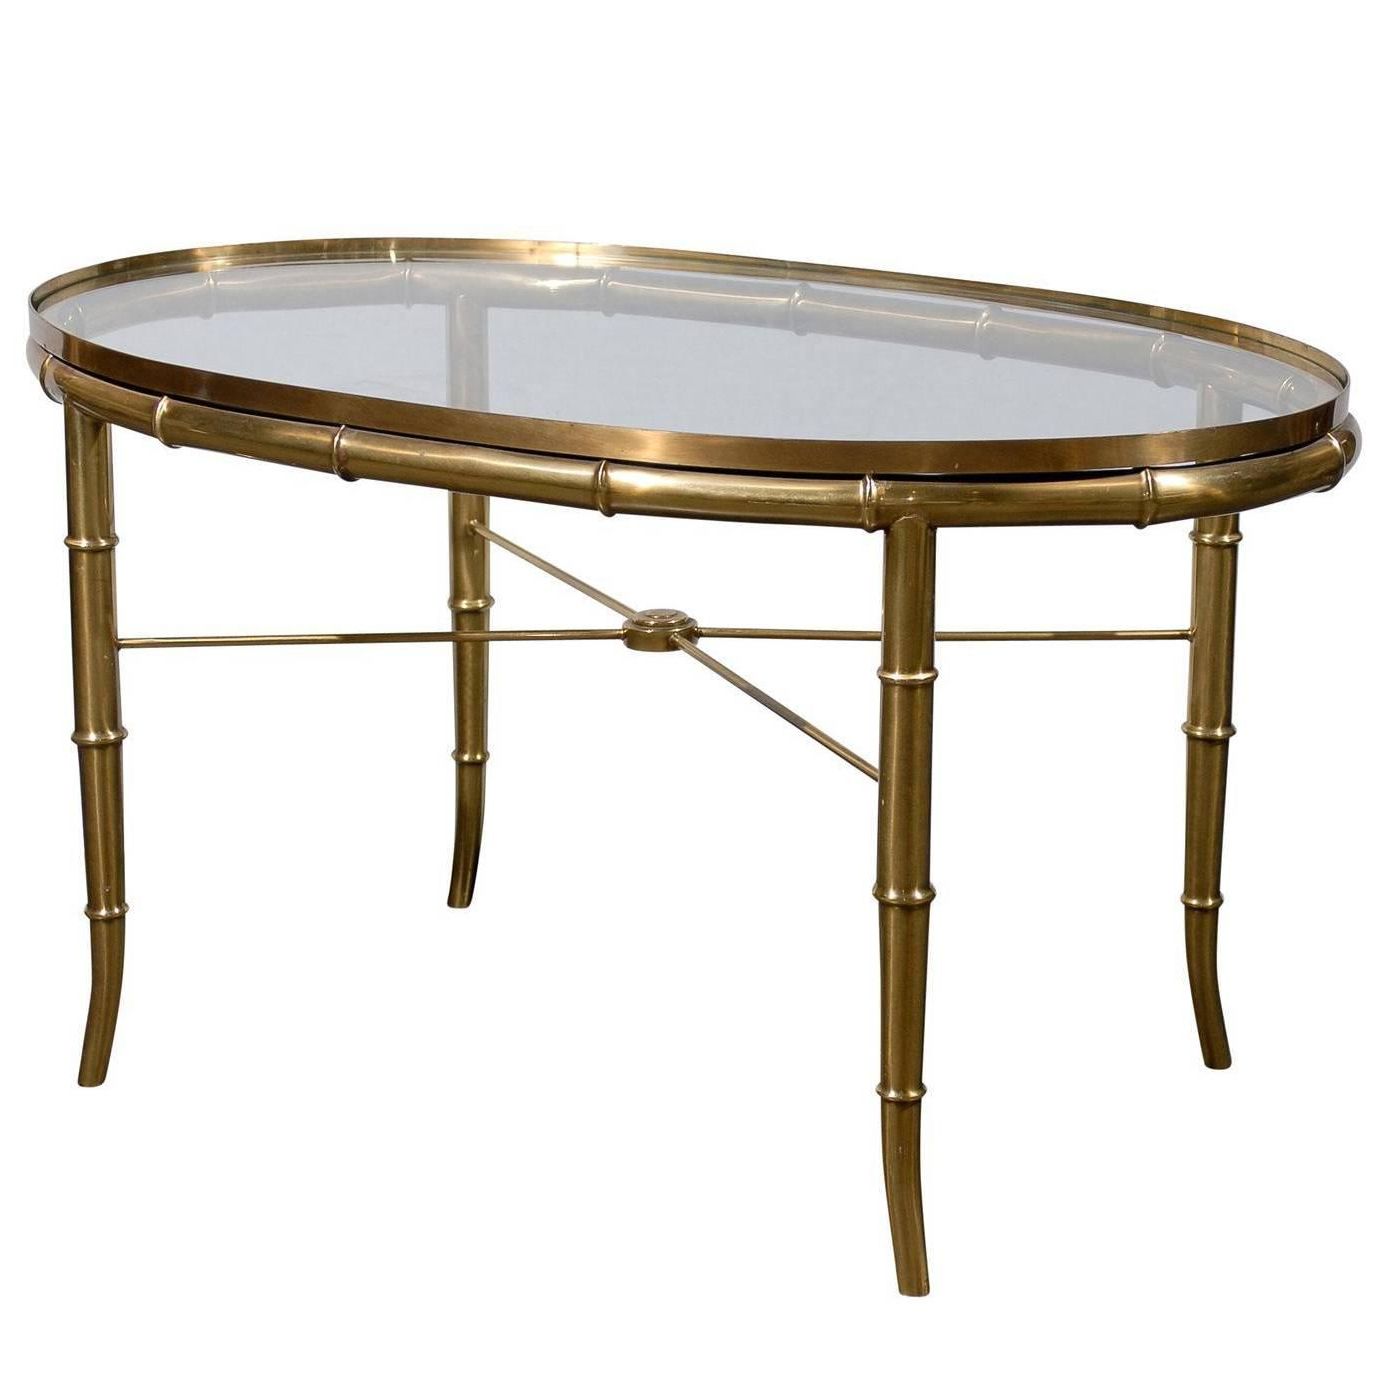 2018 Oval Brass Glass Top Cocktail Or Coffee Table At 1stdibs Inside Glass And Gold Oval Coffee Tables (View 11 of 20)